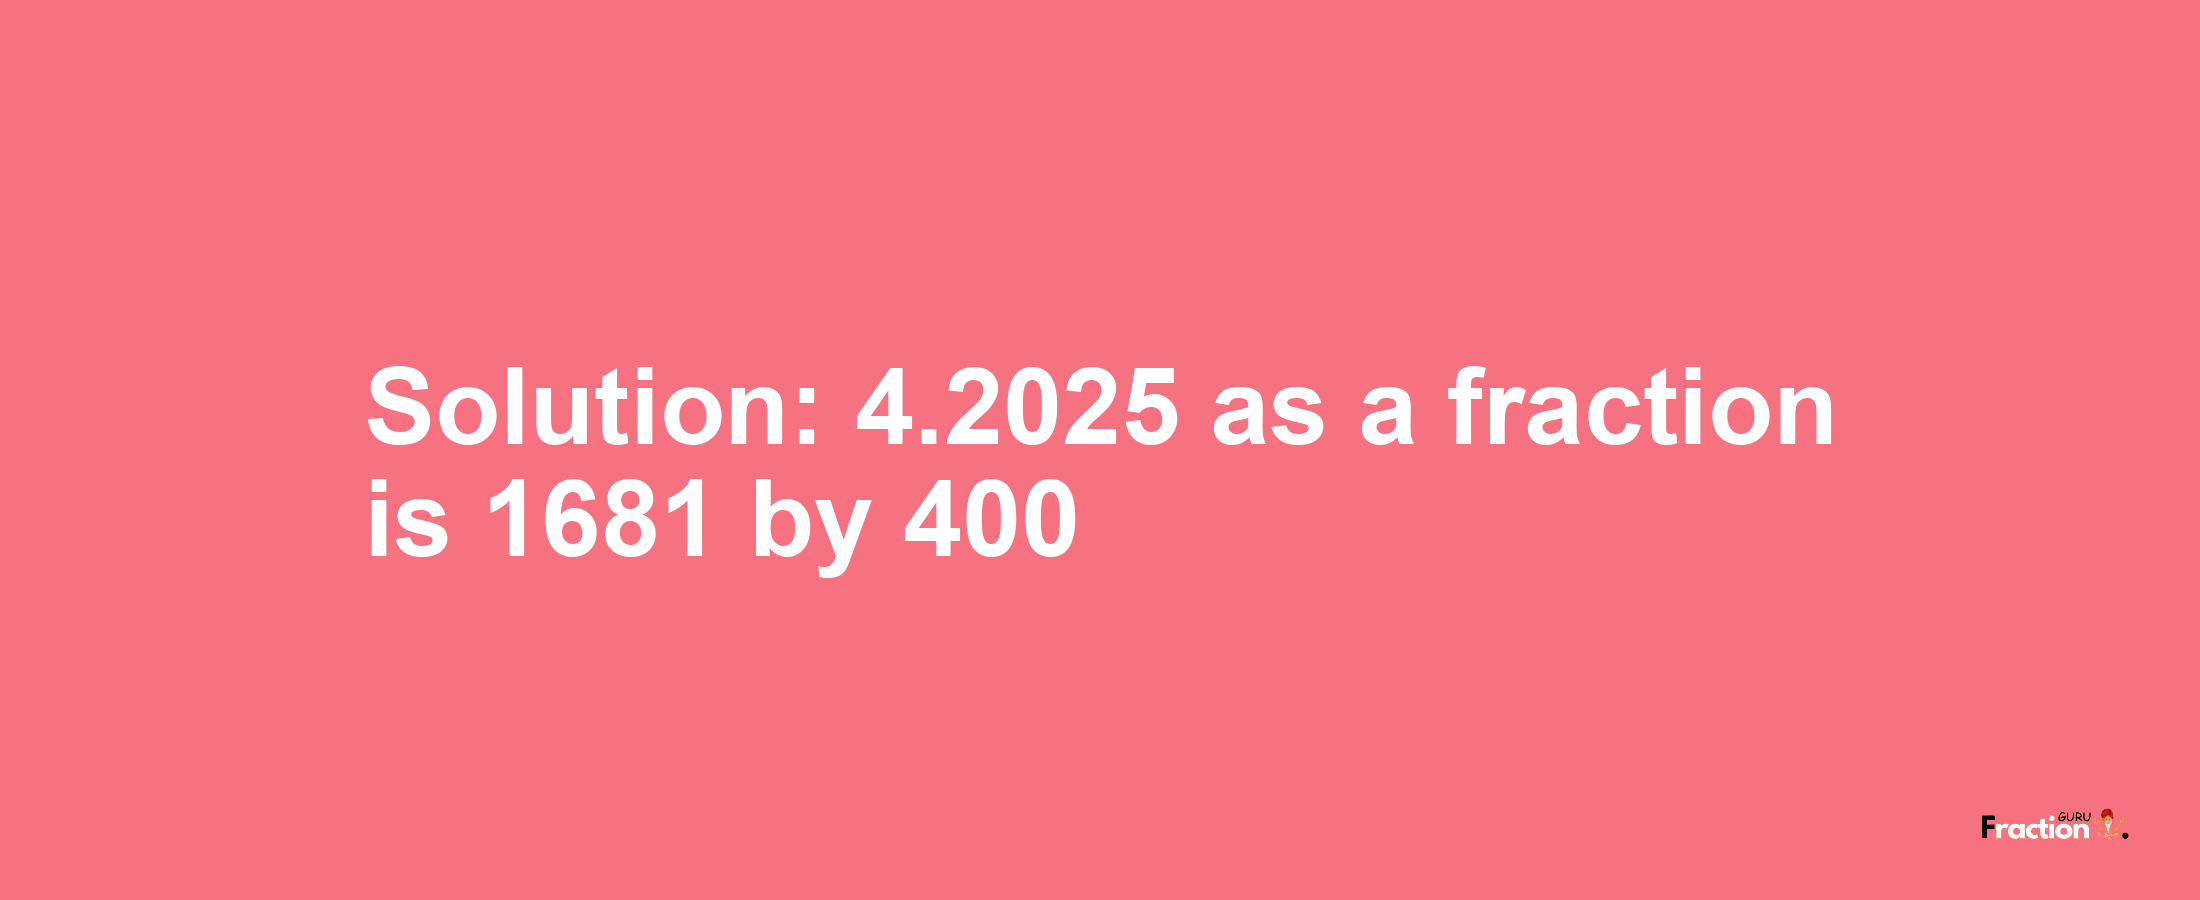 Solution:4.2025 as a fraction is 1681/400